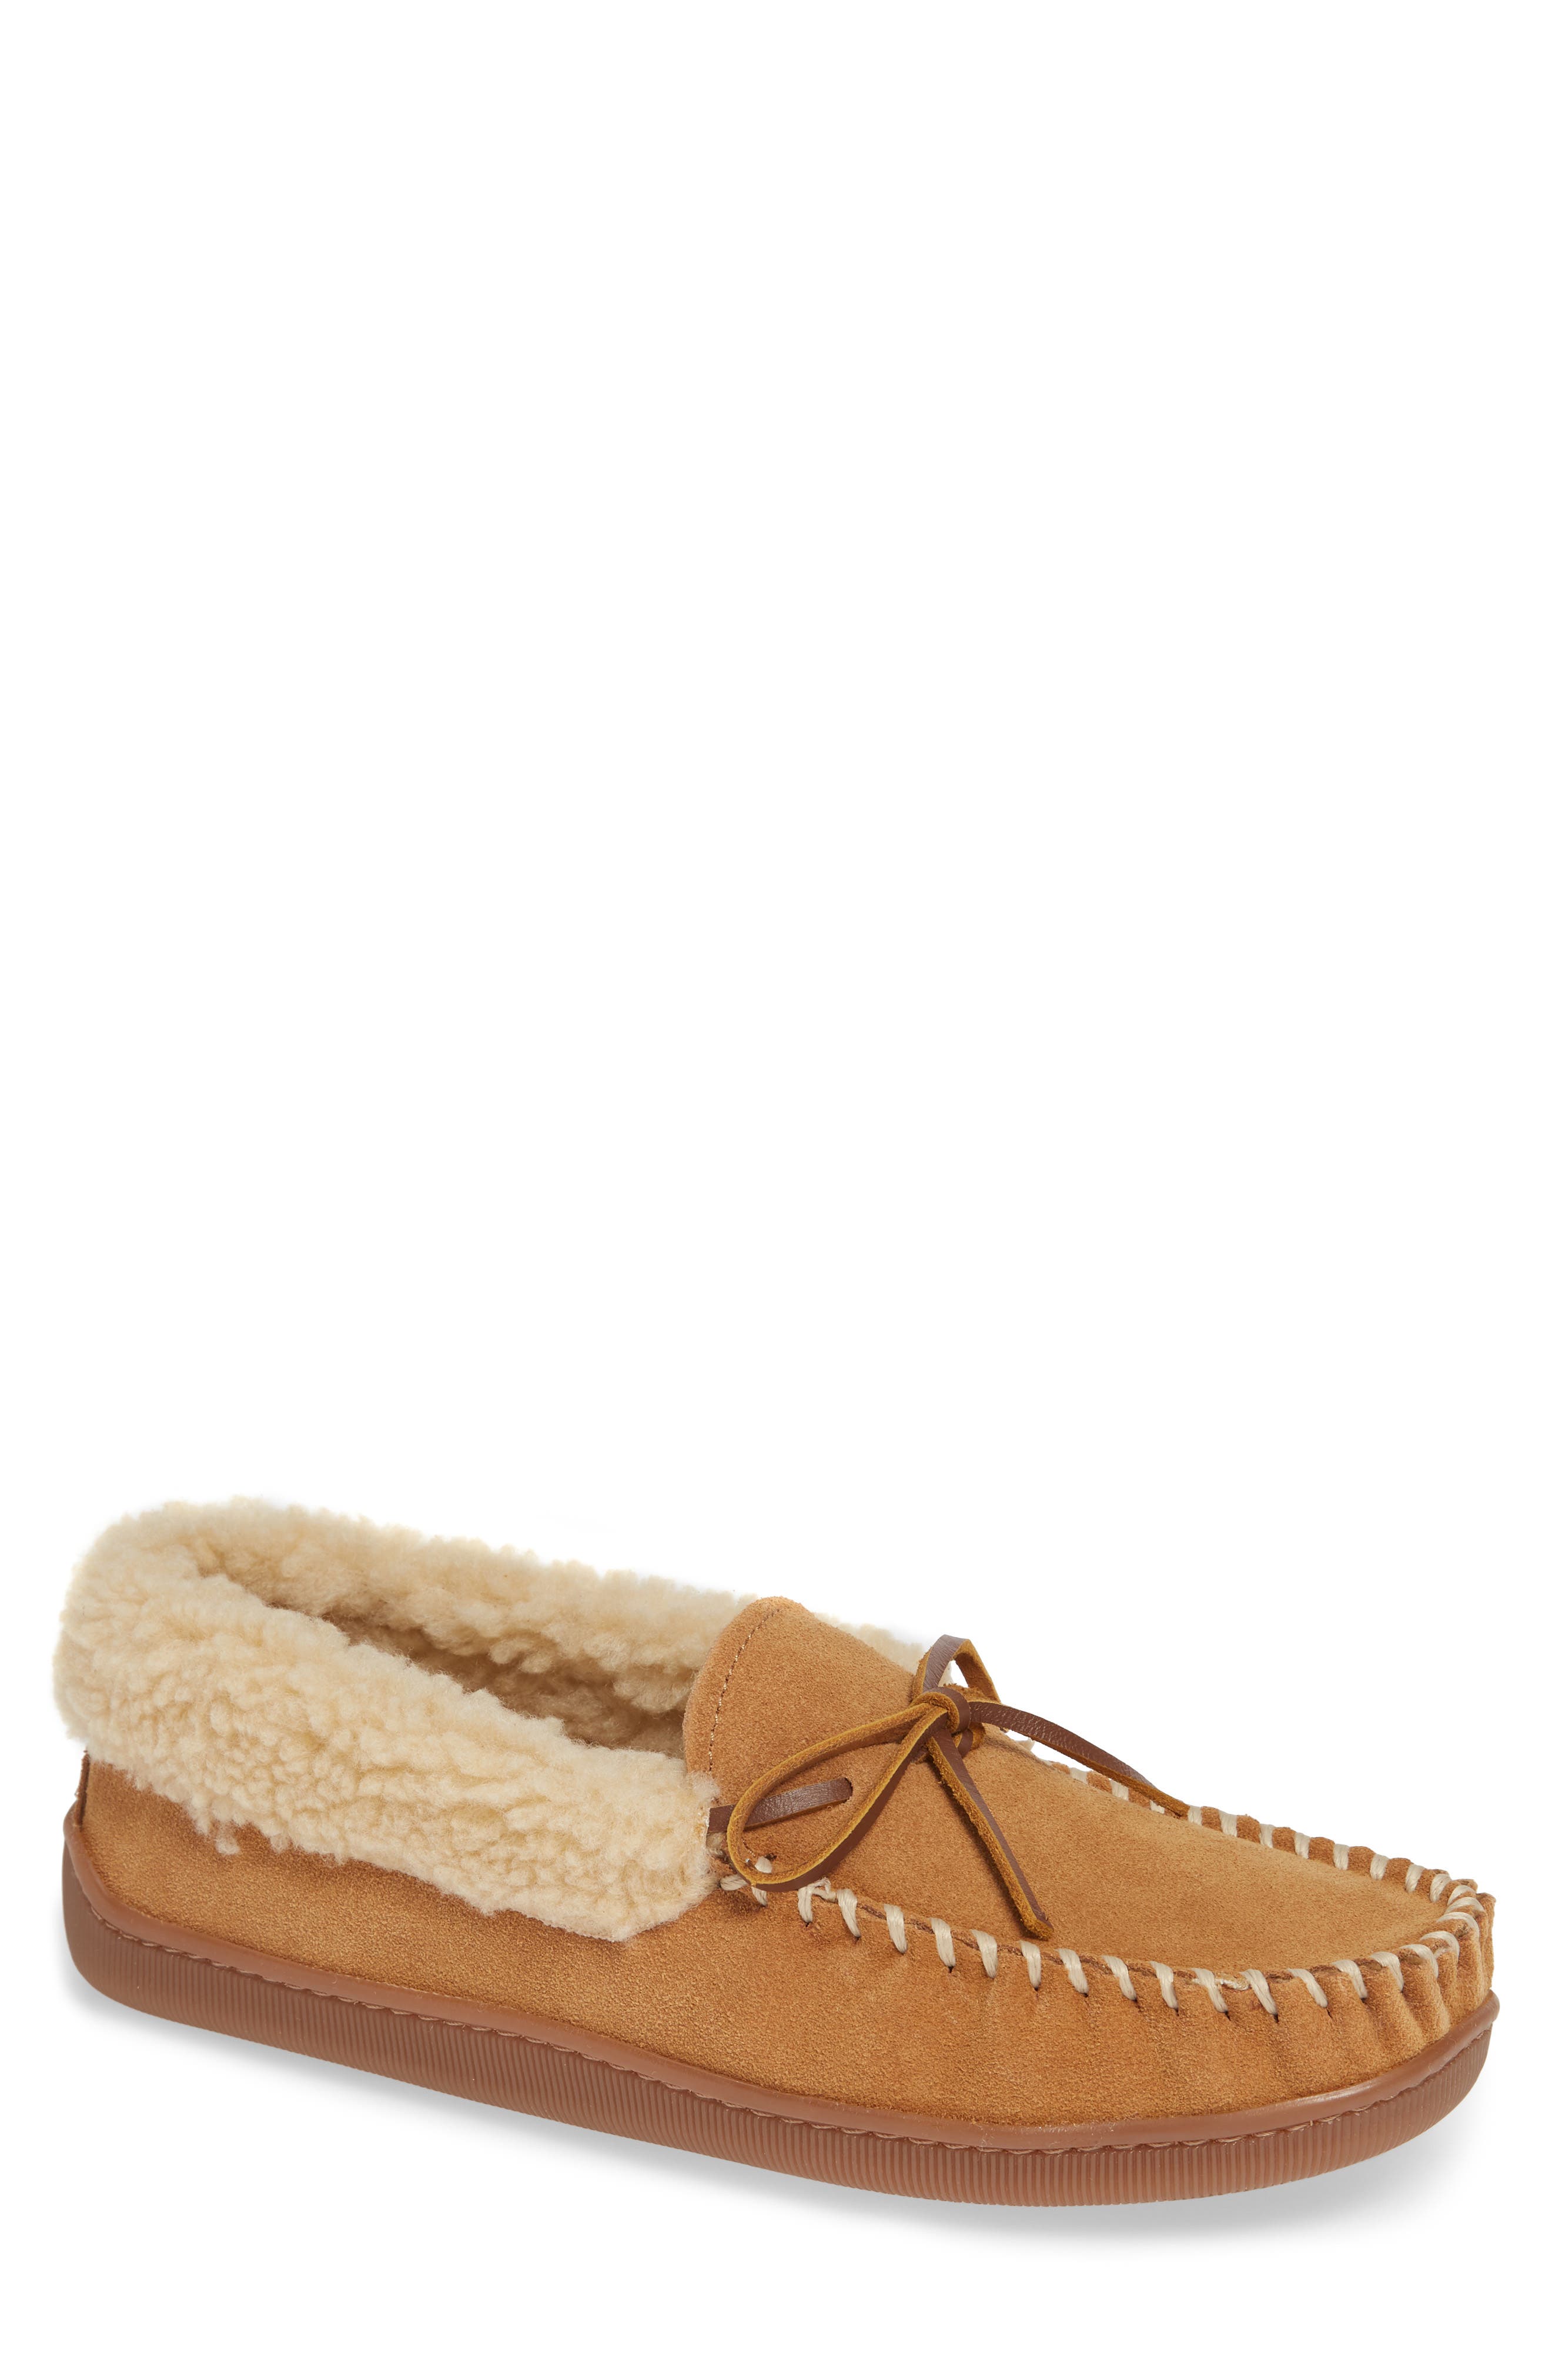 firetrap moccasin slippers mens